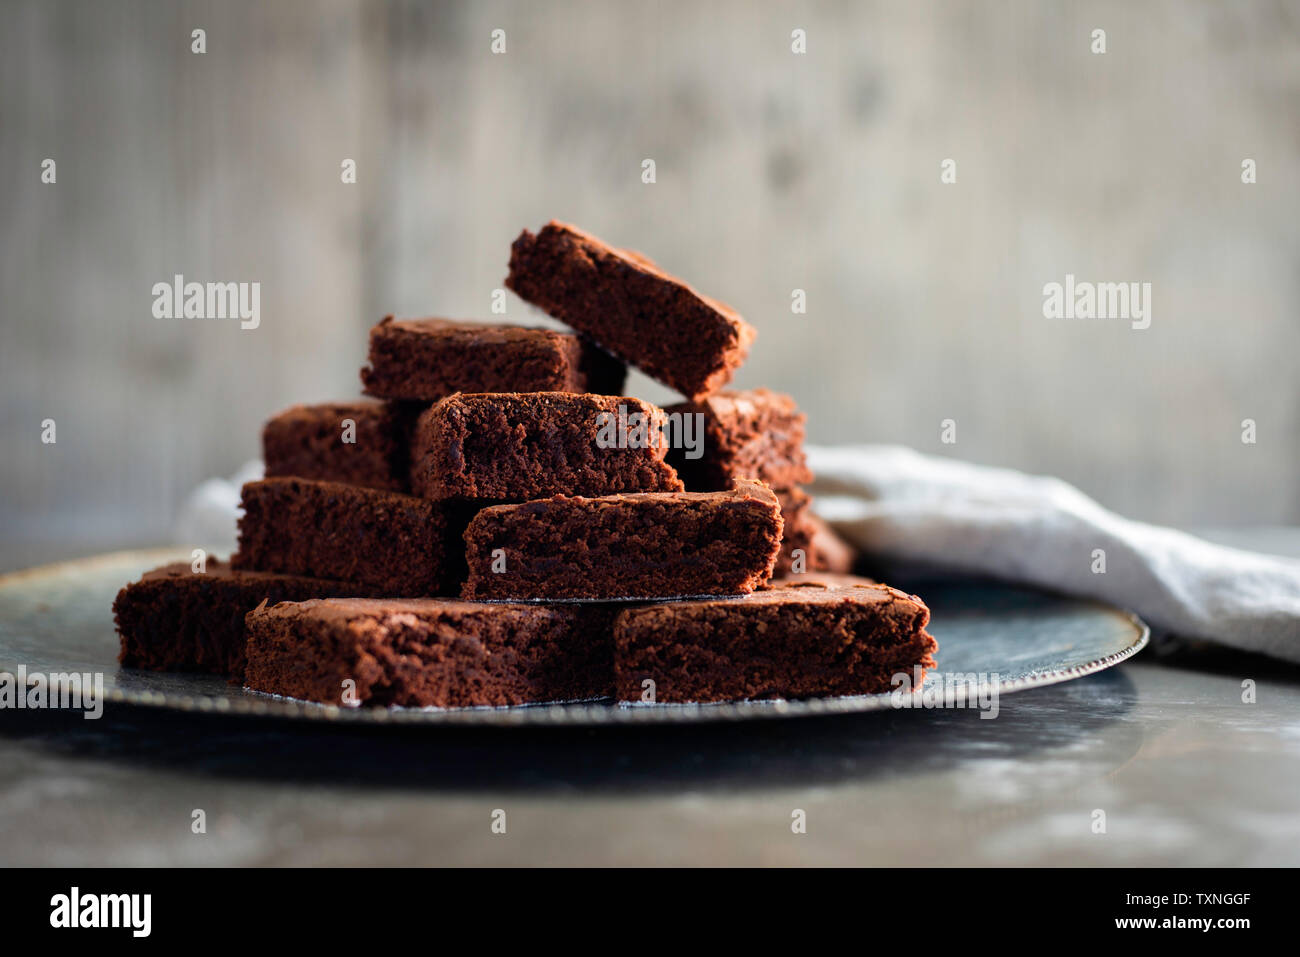 Chocolate brownies on plate with napkin Stock Photo